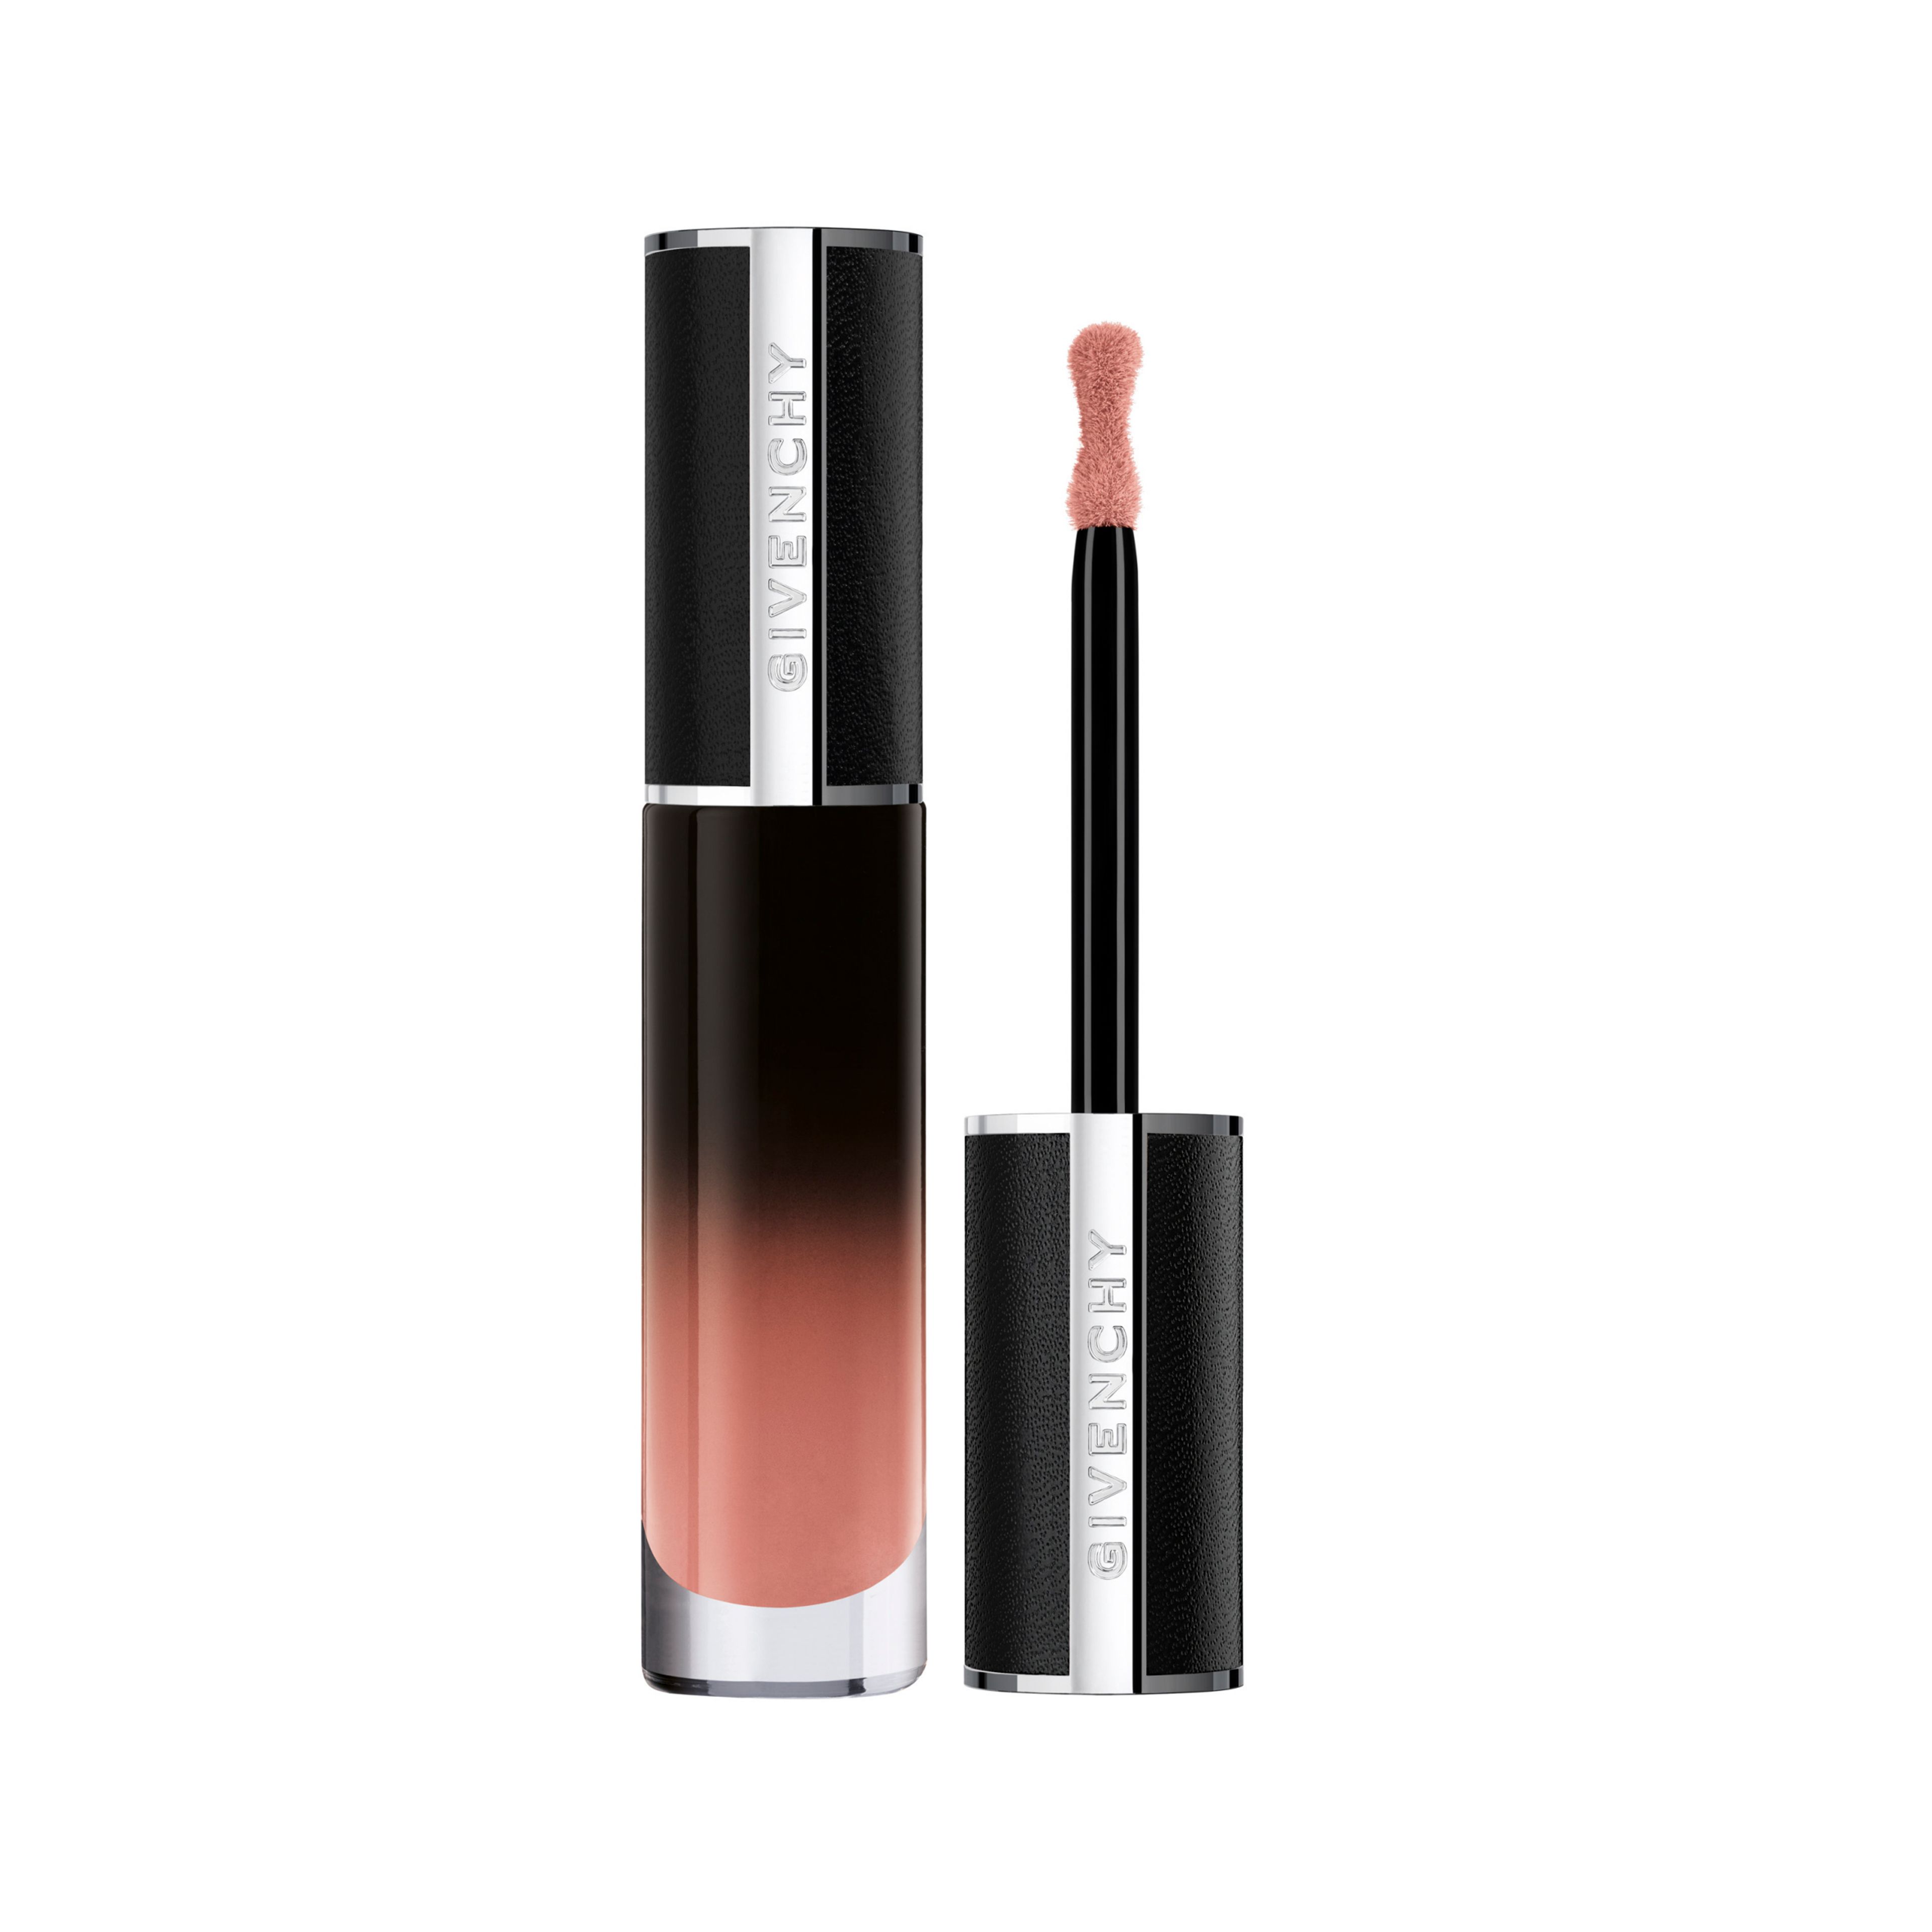 Givenchy Le Rouge 1